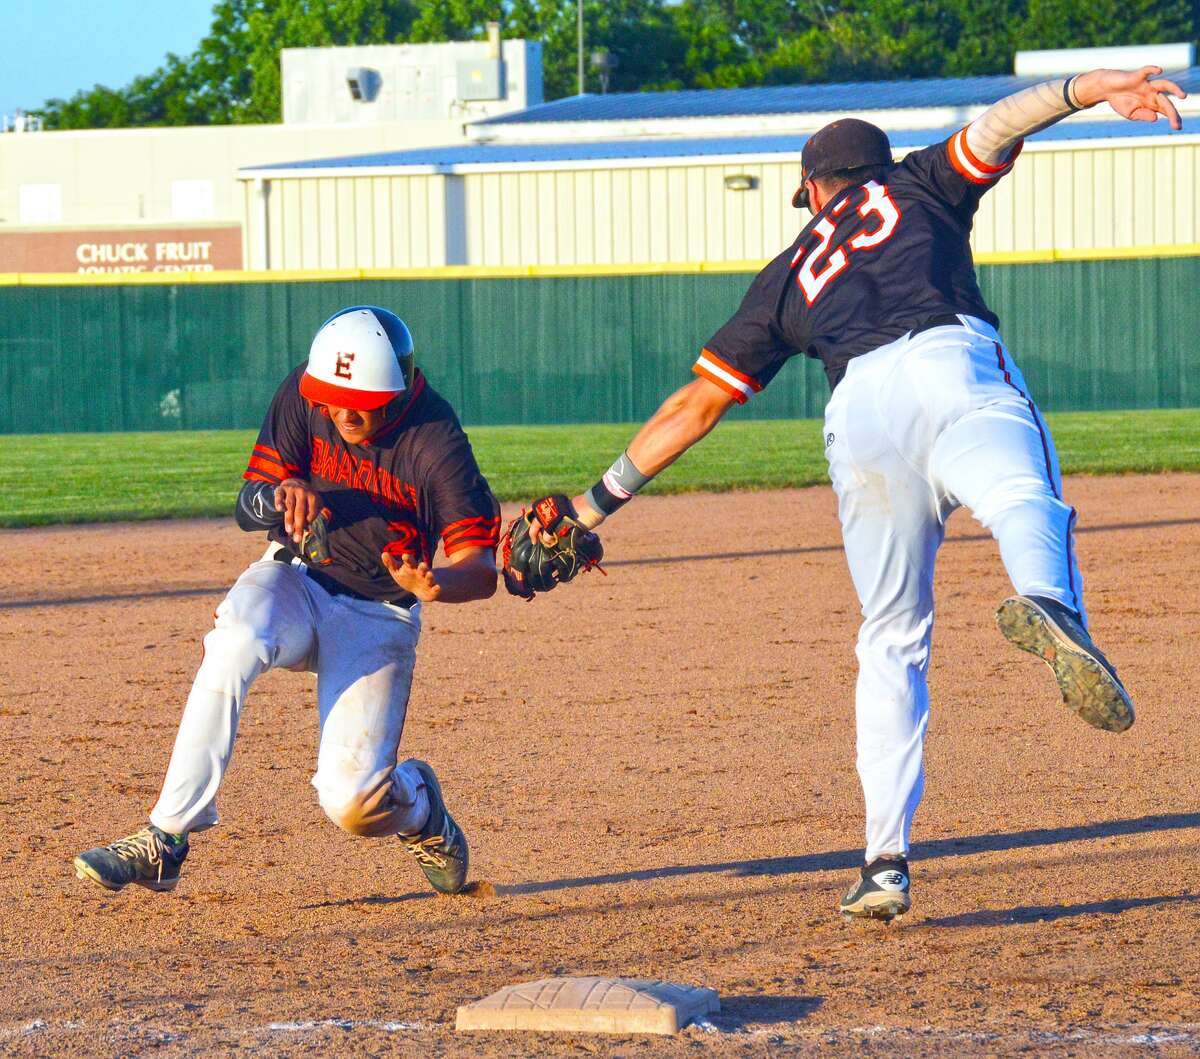 Edwardsville’s Chase Gockel, left, avoids the tag of Rawlings third baseman Stephen Randazzo in the fifth inning of Thursday’s game at Tom Pile Field.